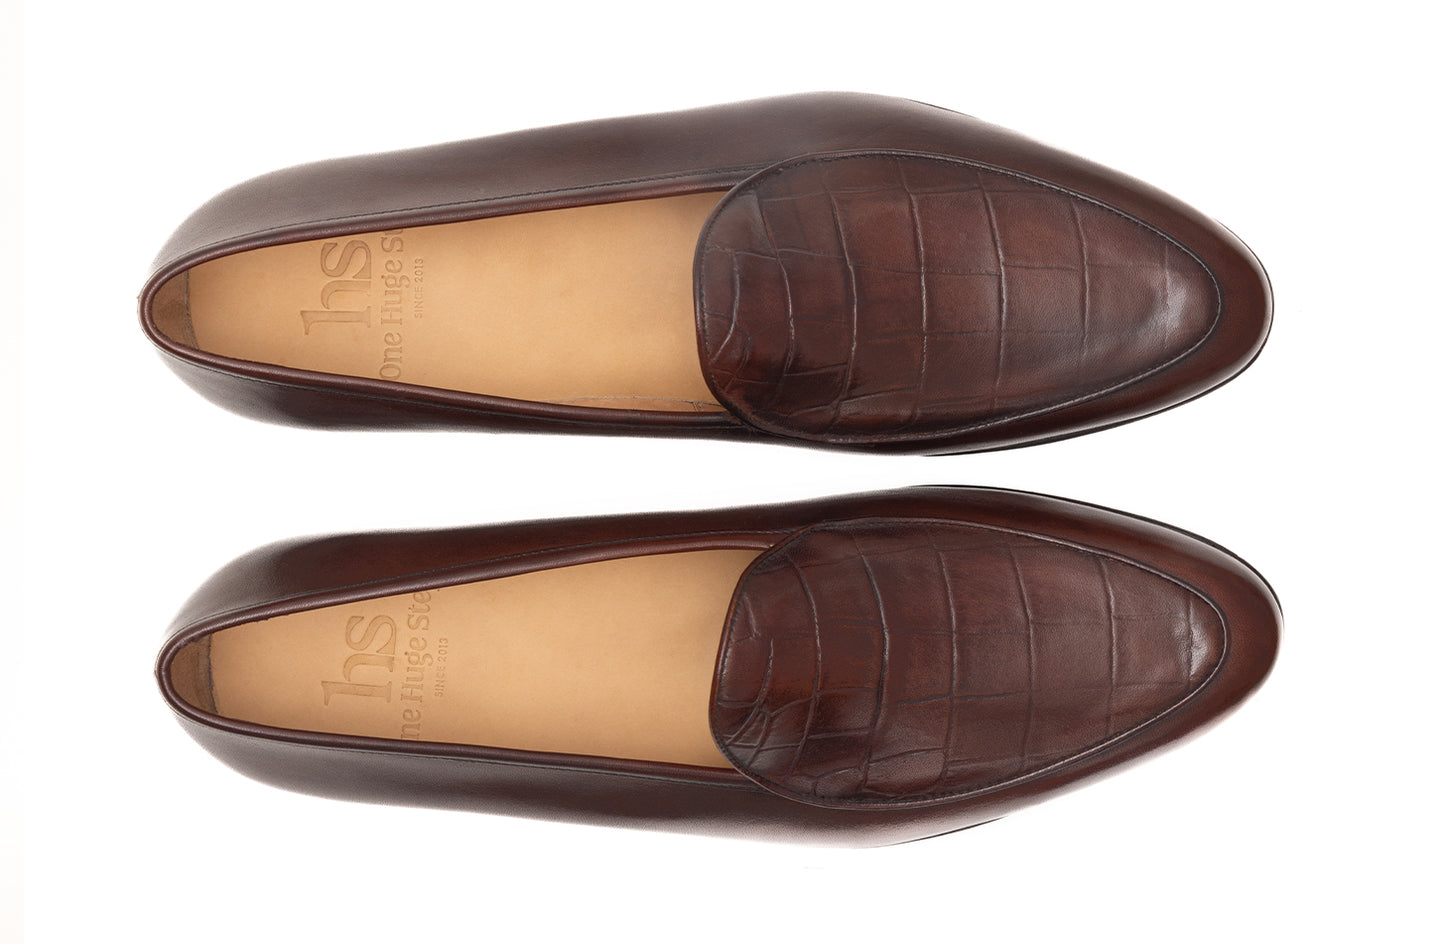 Belgian Loafer with Croc embossed apron